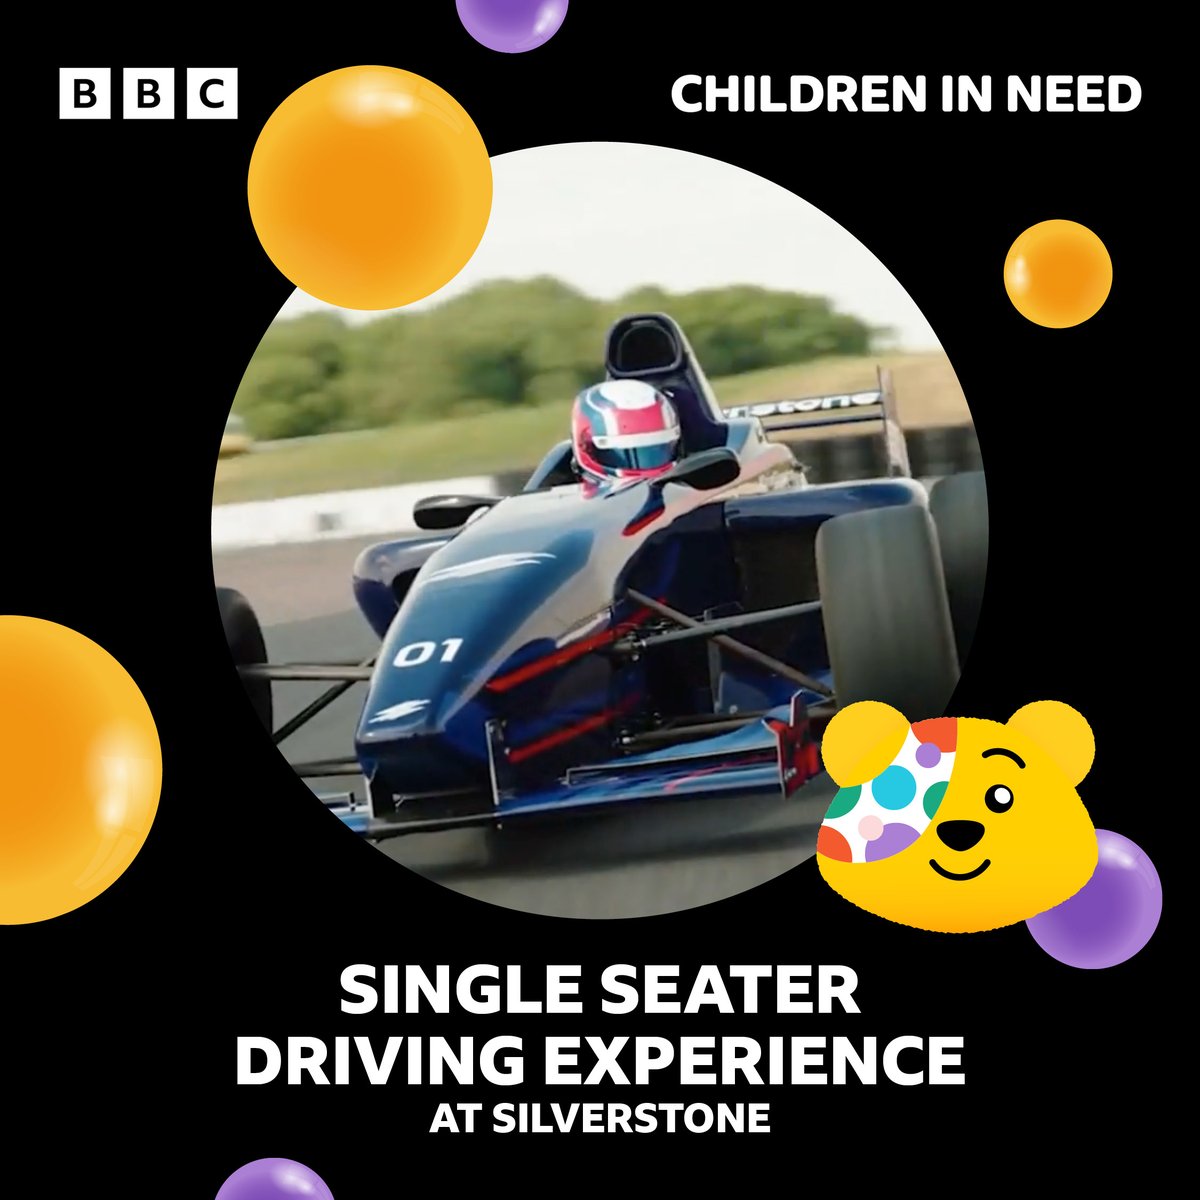 Thank you to @SilverstoneUK, who have provided a single seater driving experience at Silverstone, for our Gaming Prize Draw. Head to bbc.co.uk/pudsey to find out how to enter, and see full terms and privacy notice. 18+